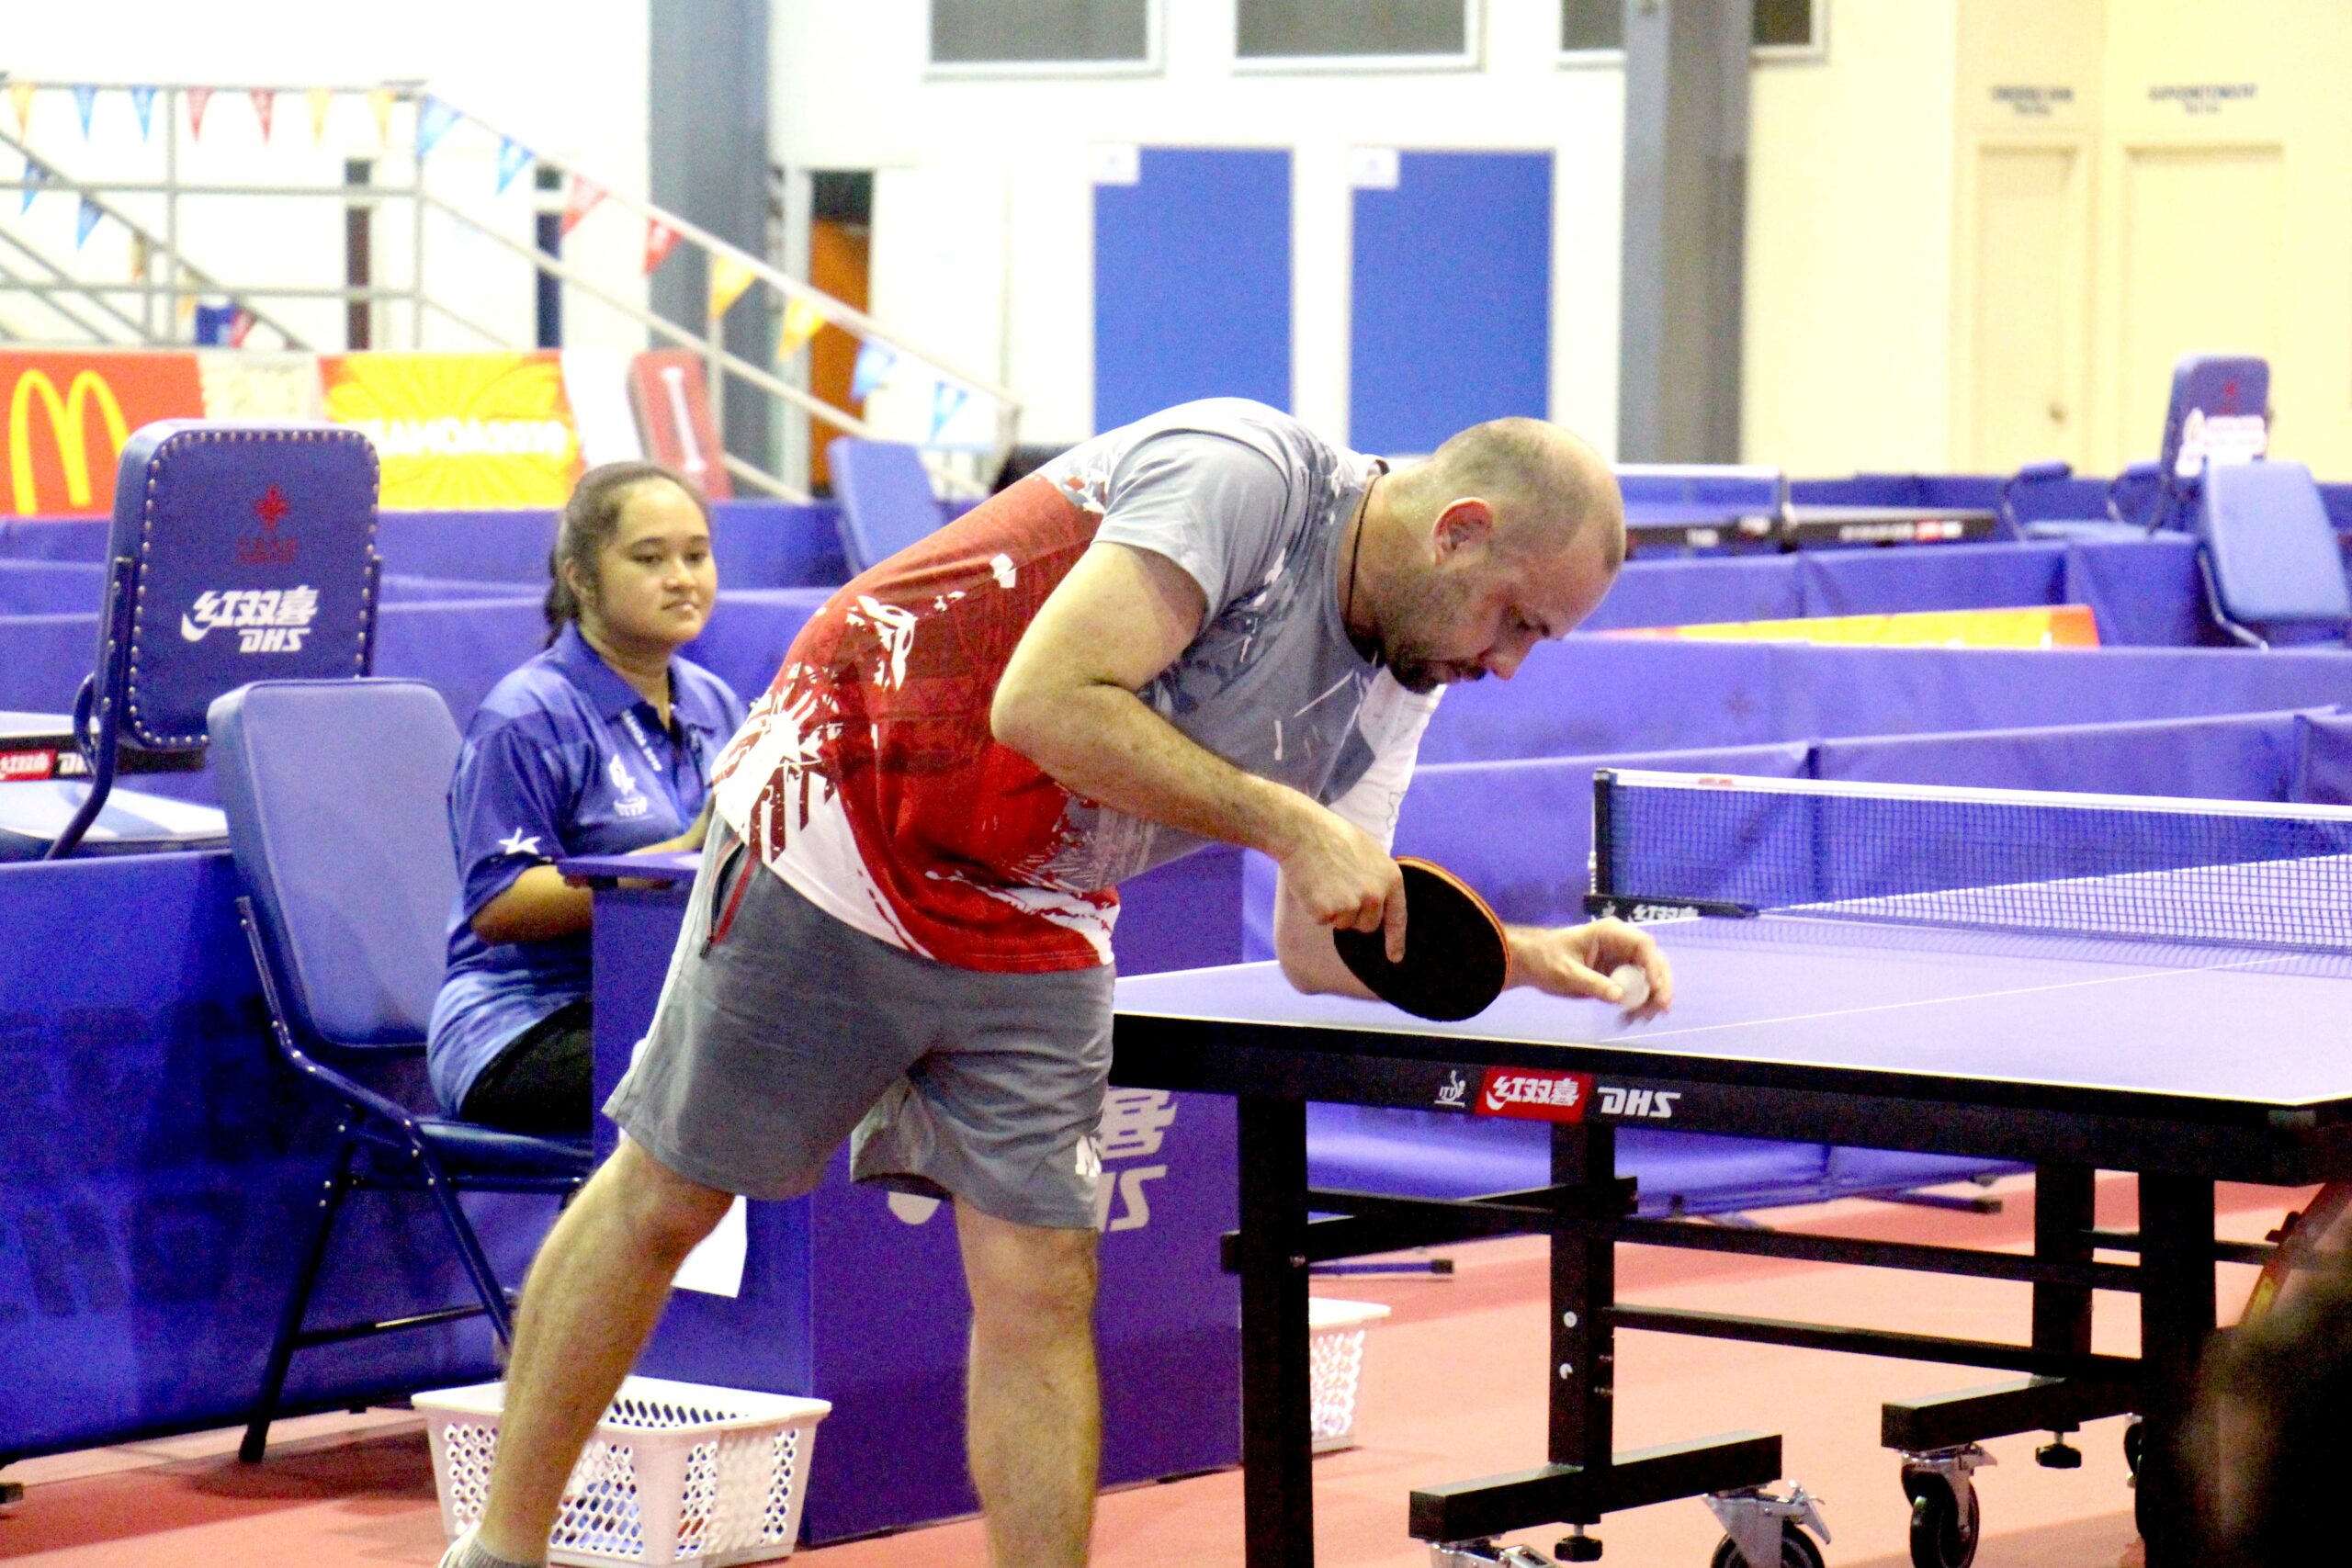 A male table tennis player